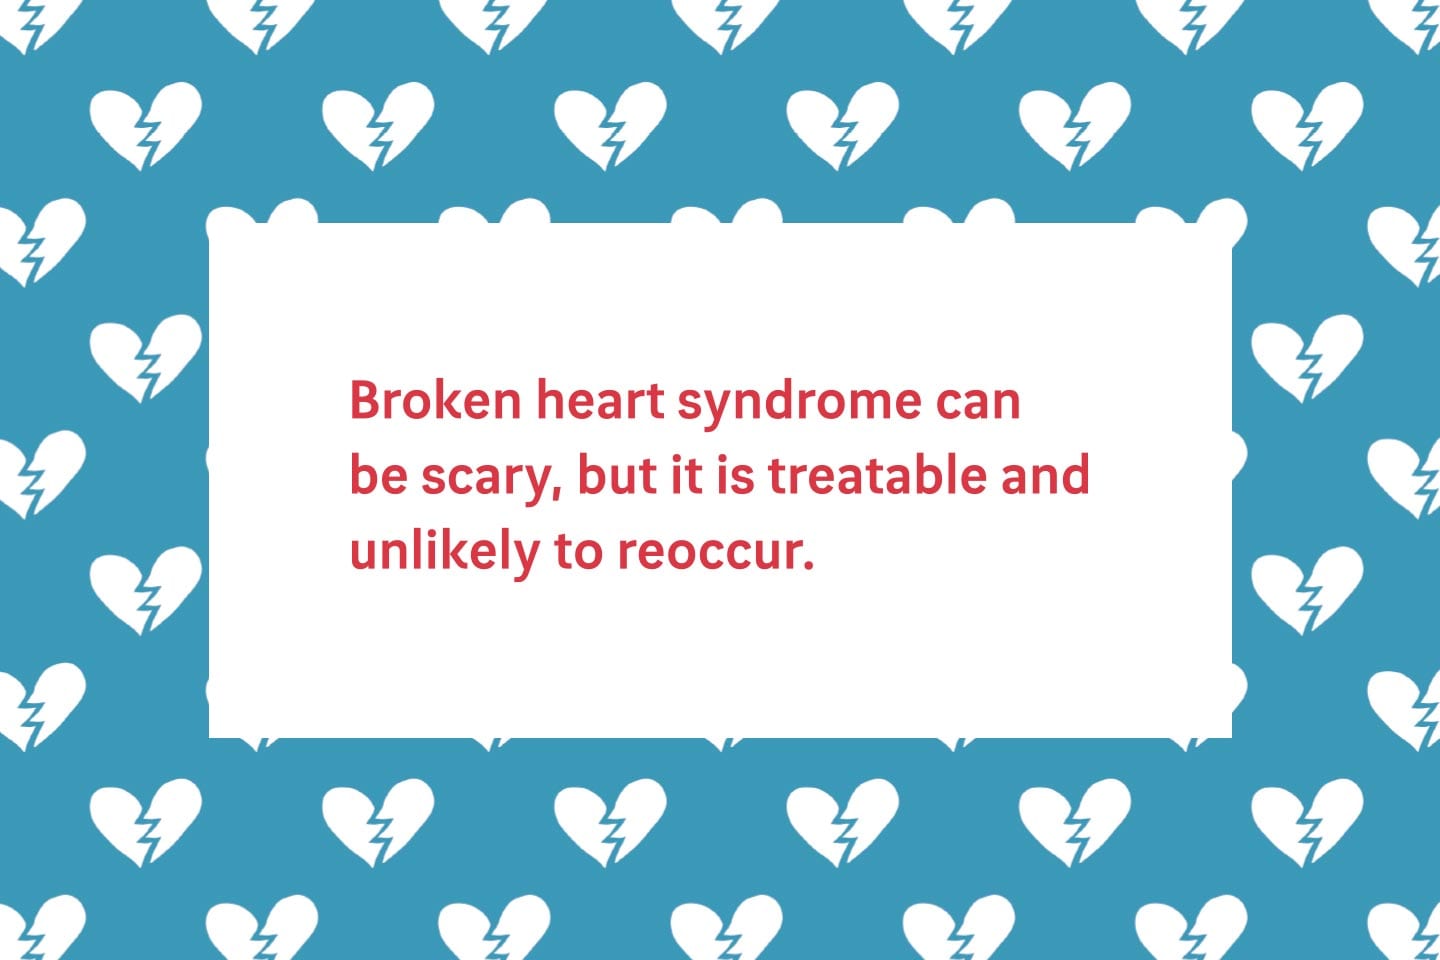 Quote about broken heart syndrome